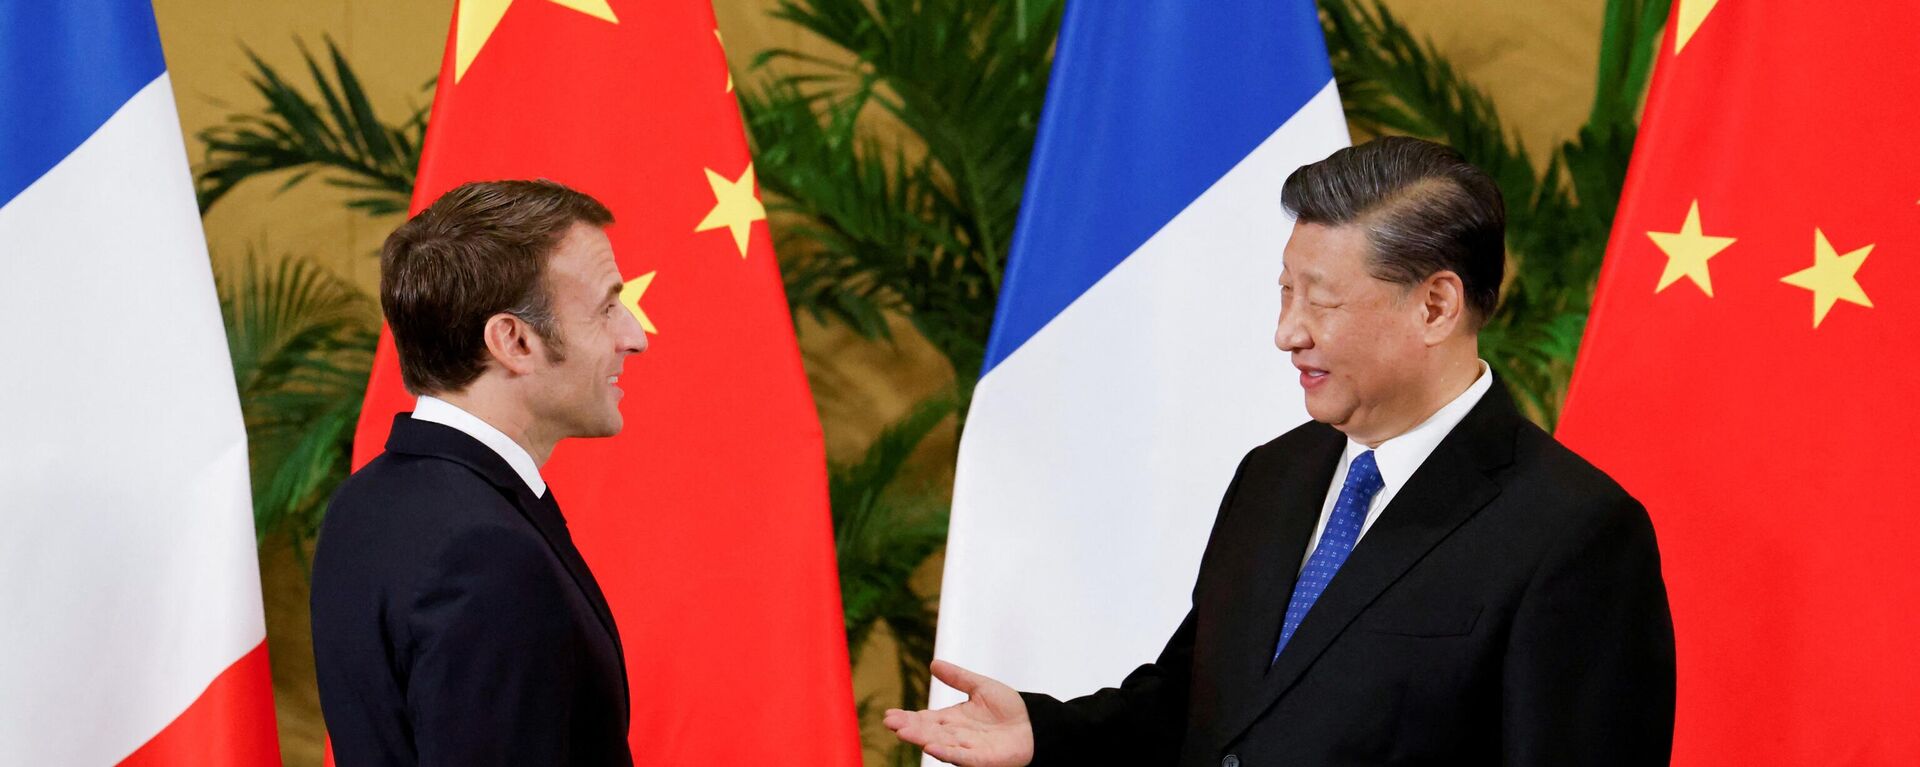 French President Emmanuel Macron (L) meets with Chinese President Xi Jinping on the sidelines of the G20 Summit in Nusa Dua on the Indonesian resort island of Bali on November 15, 2022. - Sputnik International, 1920, 15.11.2022